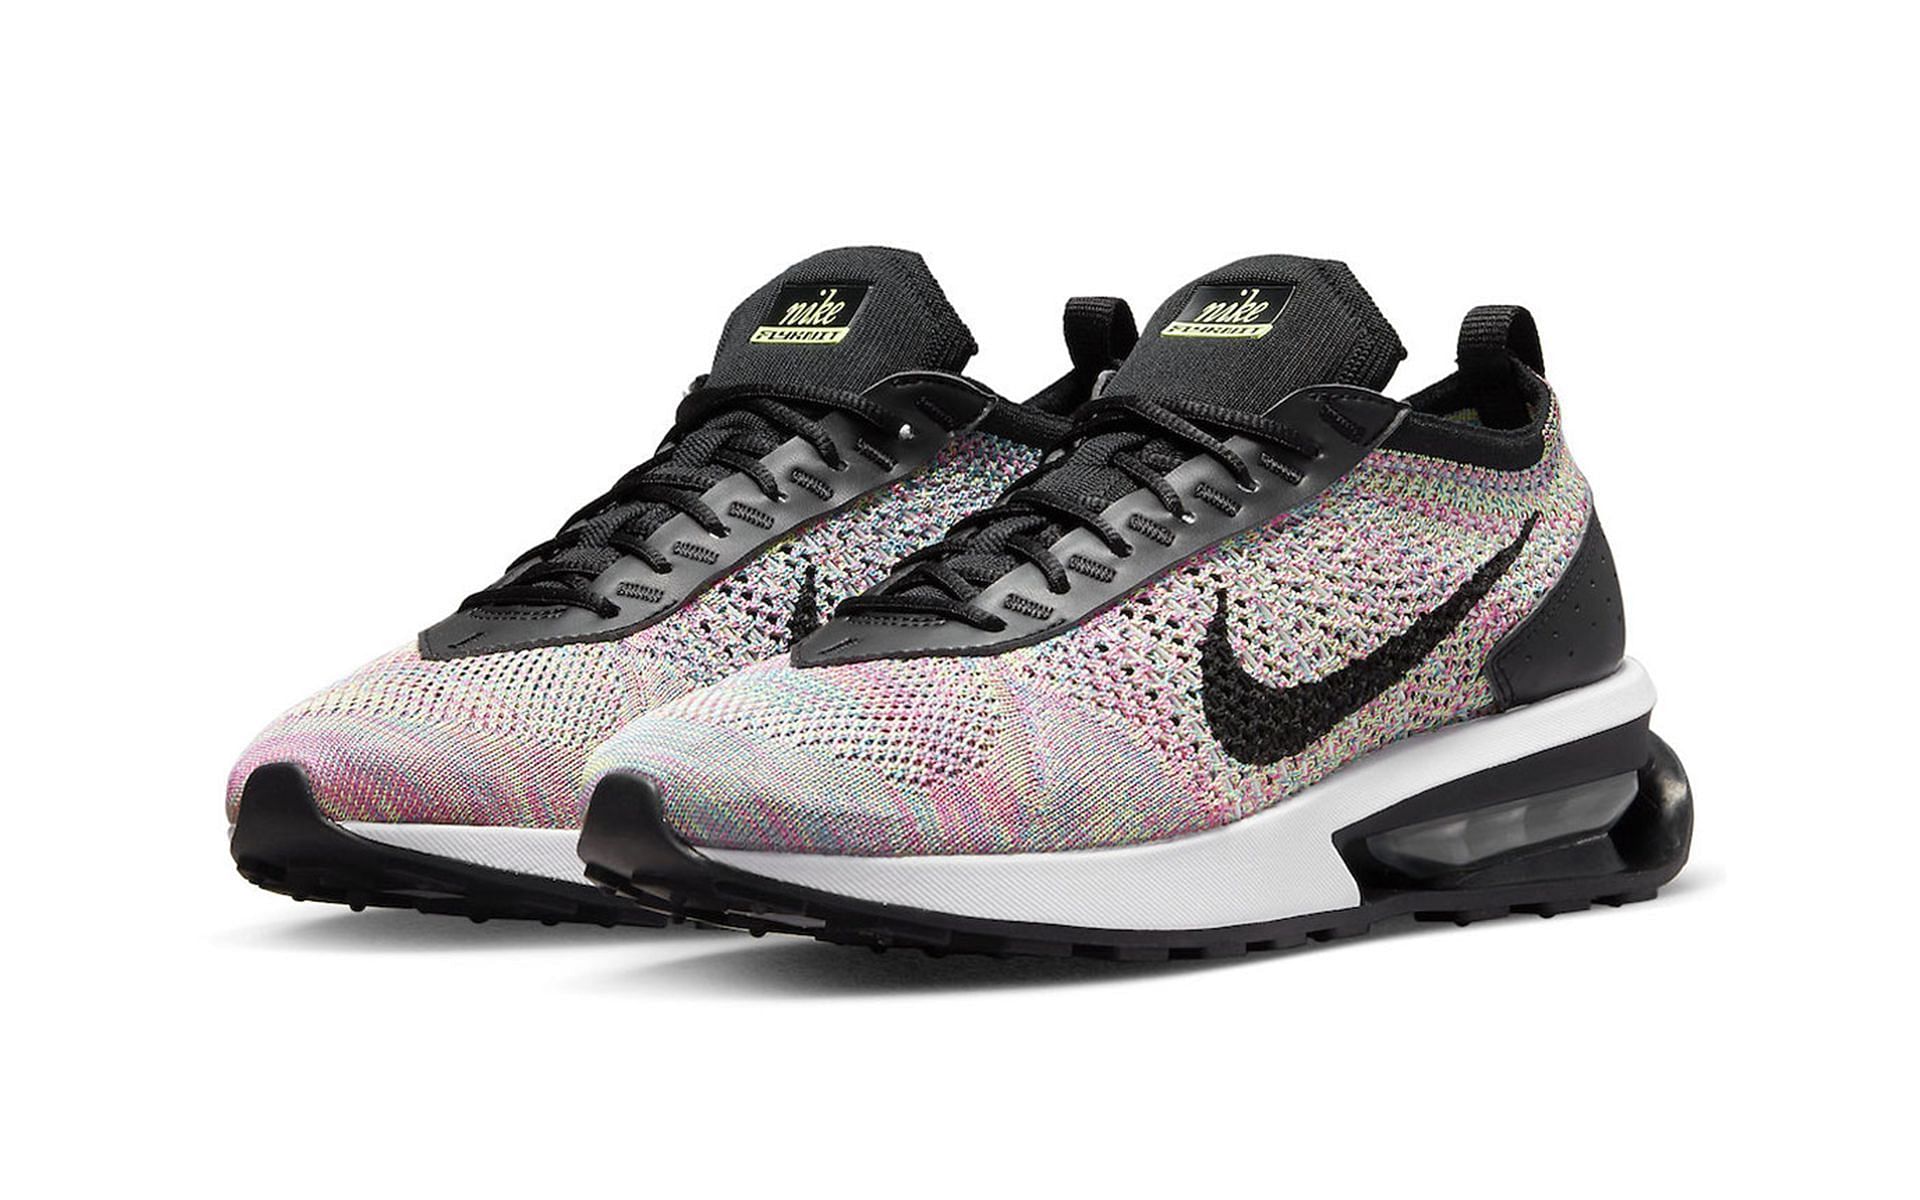 Marcar Clip mariposa saber Where to buy Nike Air Max Flyknit Racer Multicolor shoes ? Release date,  price and more details explored